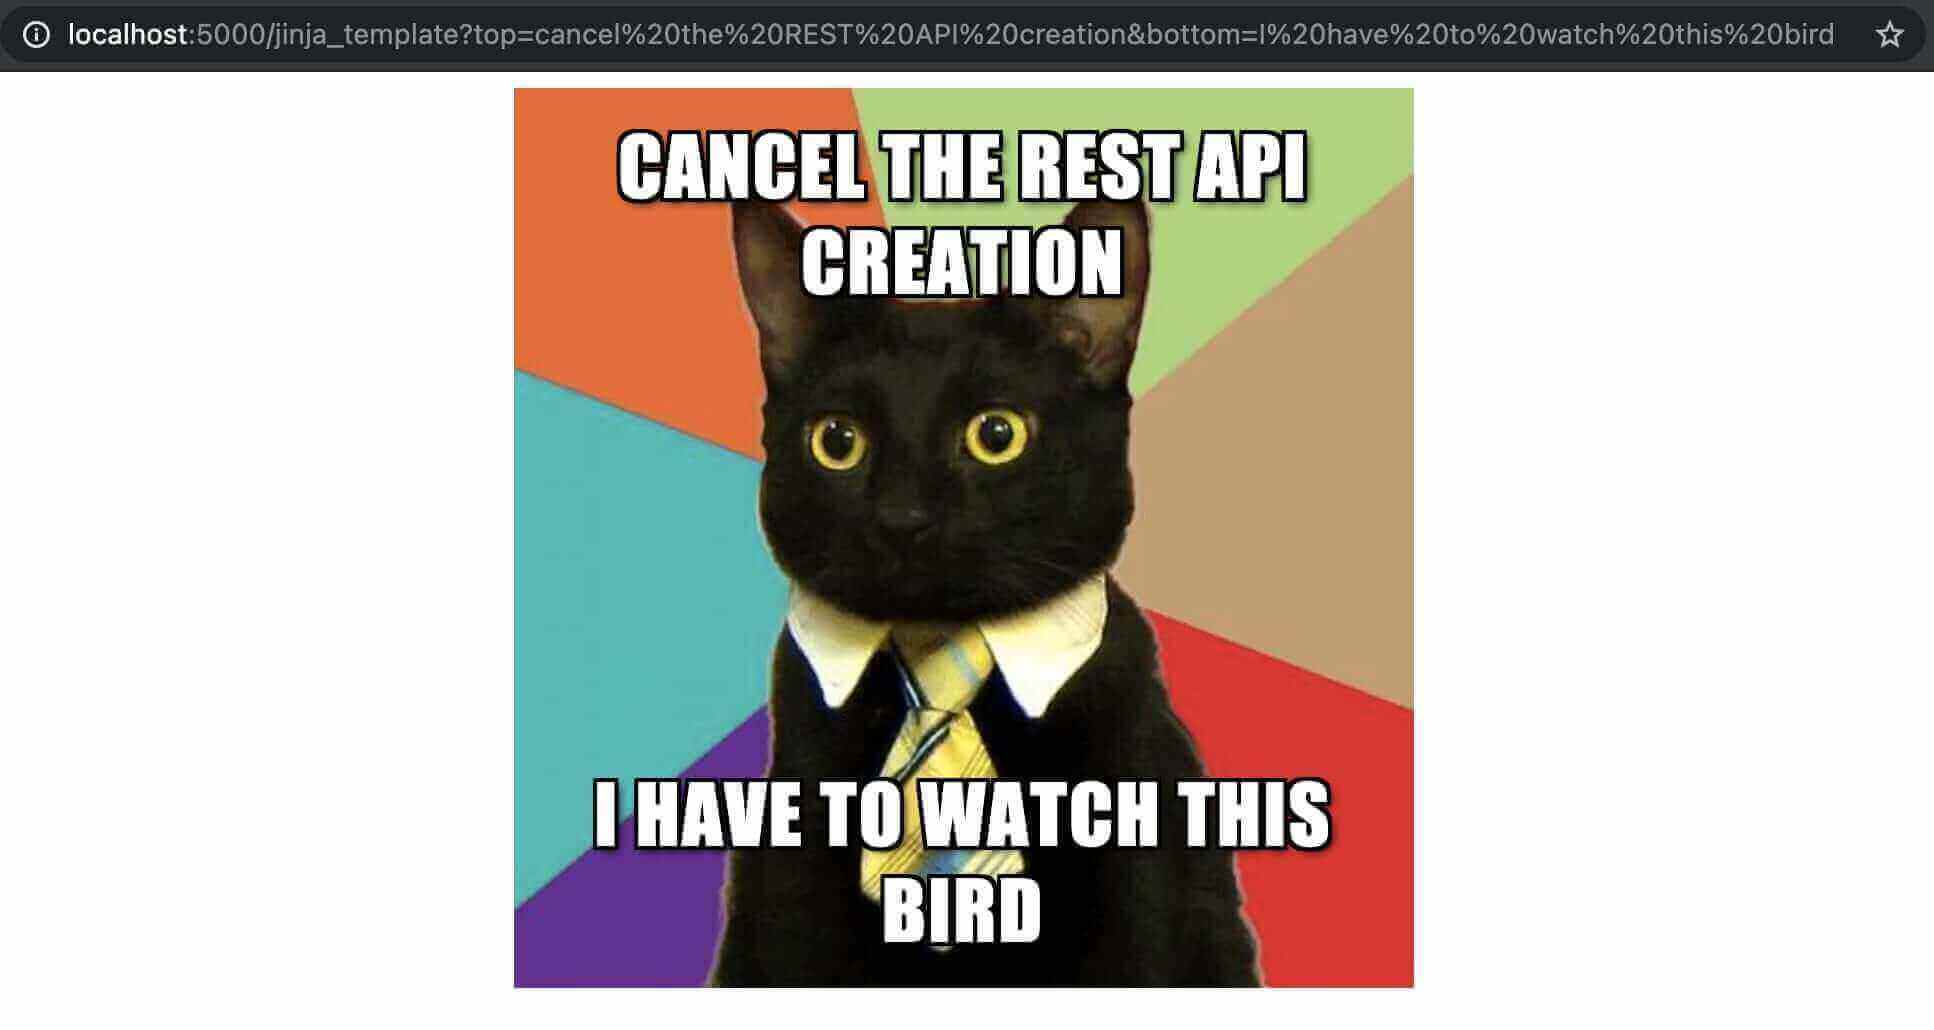 Screenshot of a meme showing a black cat with a yellow necktie with the message "Cancel the Rest API creation, I have to watch this bird" indicating an error.